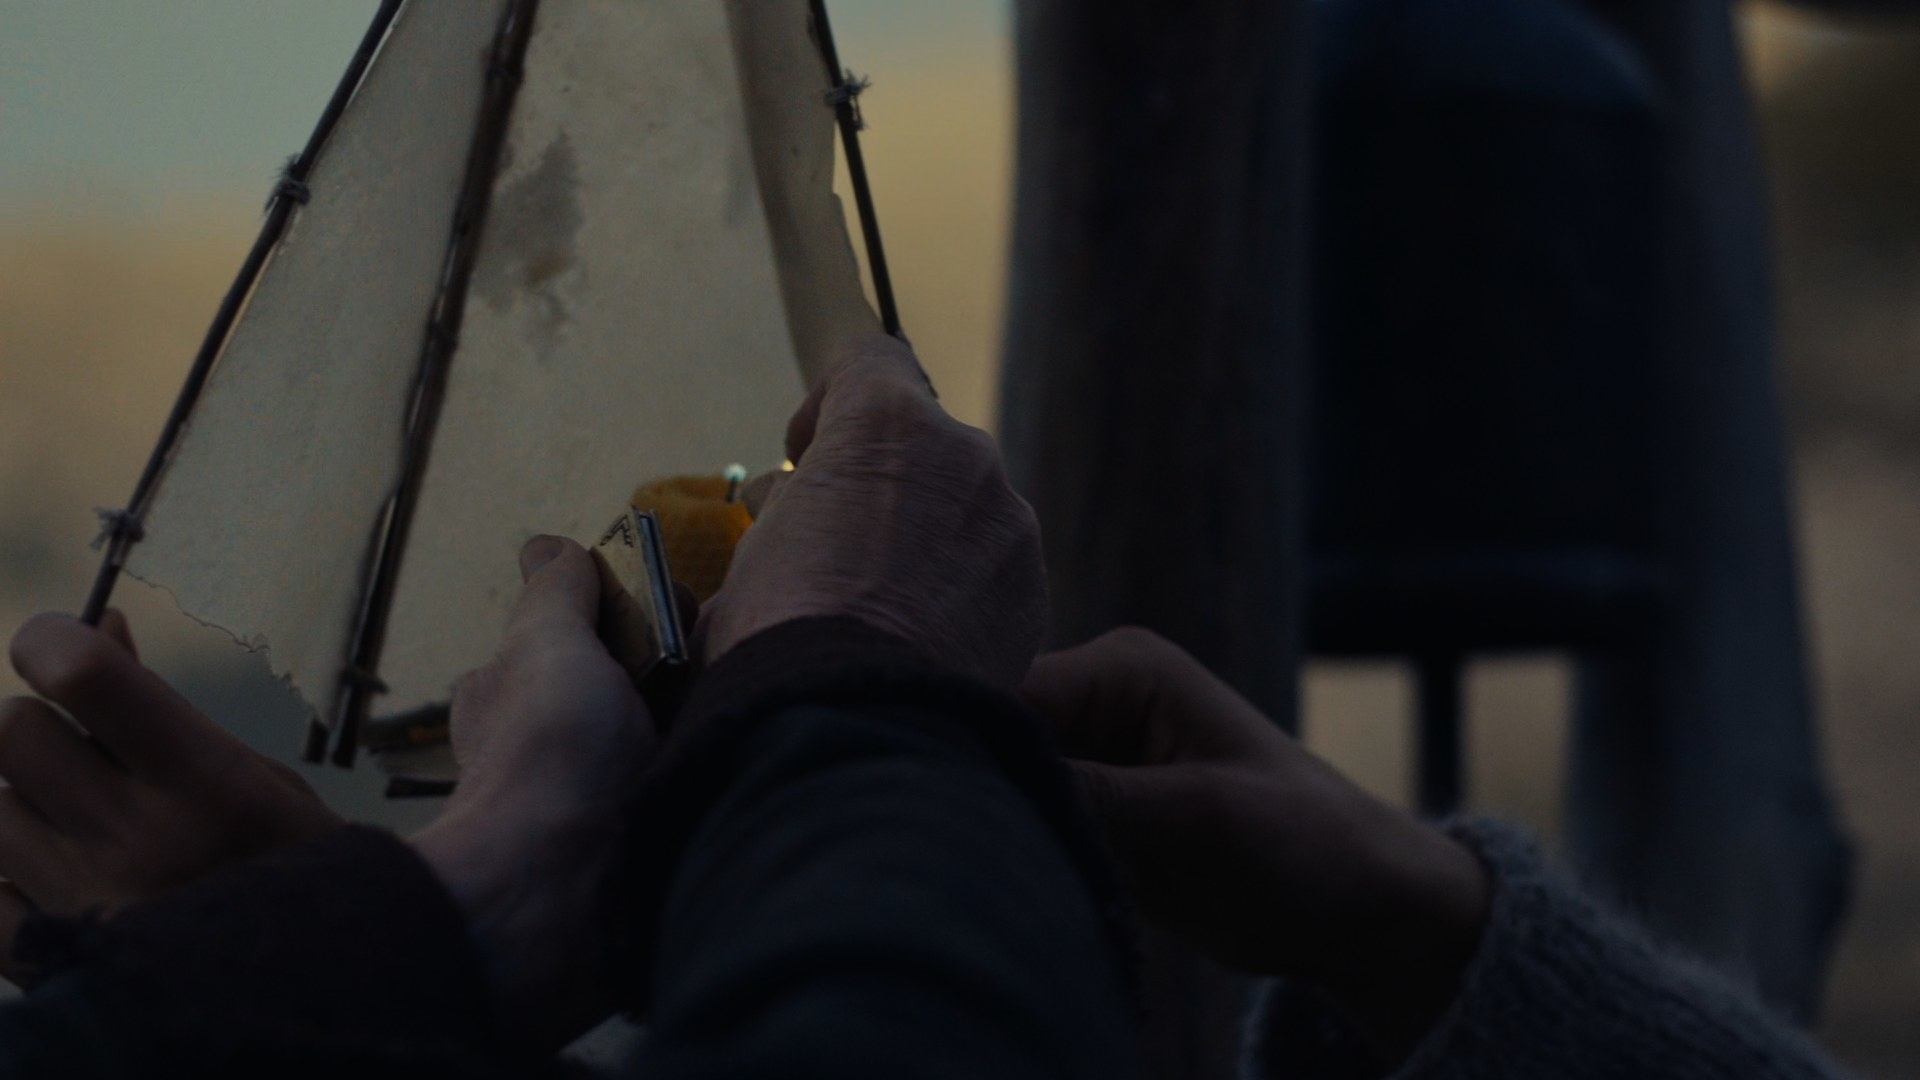 A close-up shot of Tam (Michael McElhatton) and Rand’s (Josha Stradowski) hands as they light a candle within a paper lantern. In Tam’s left hand is a shiny metal book of matches.